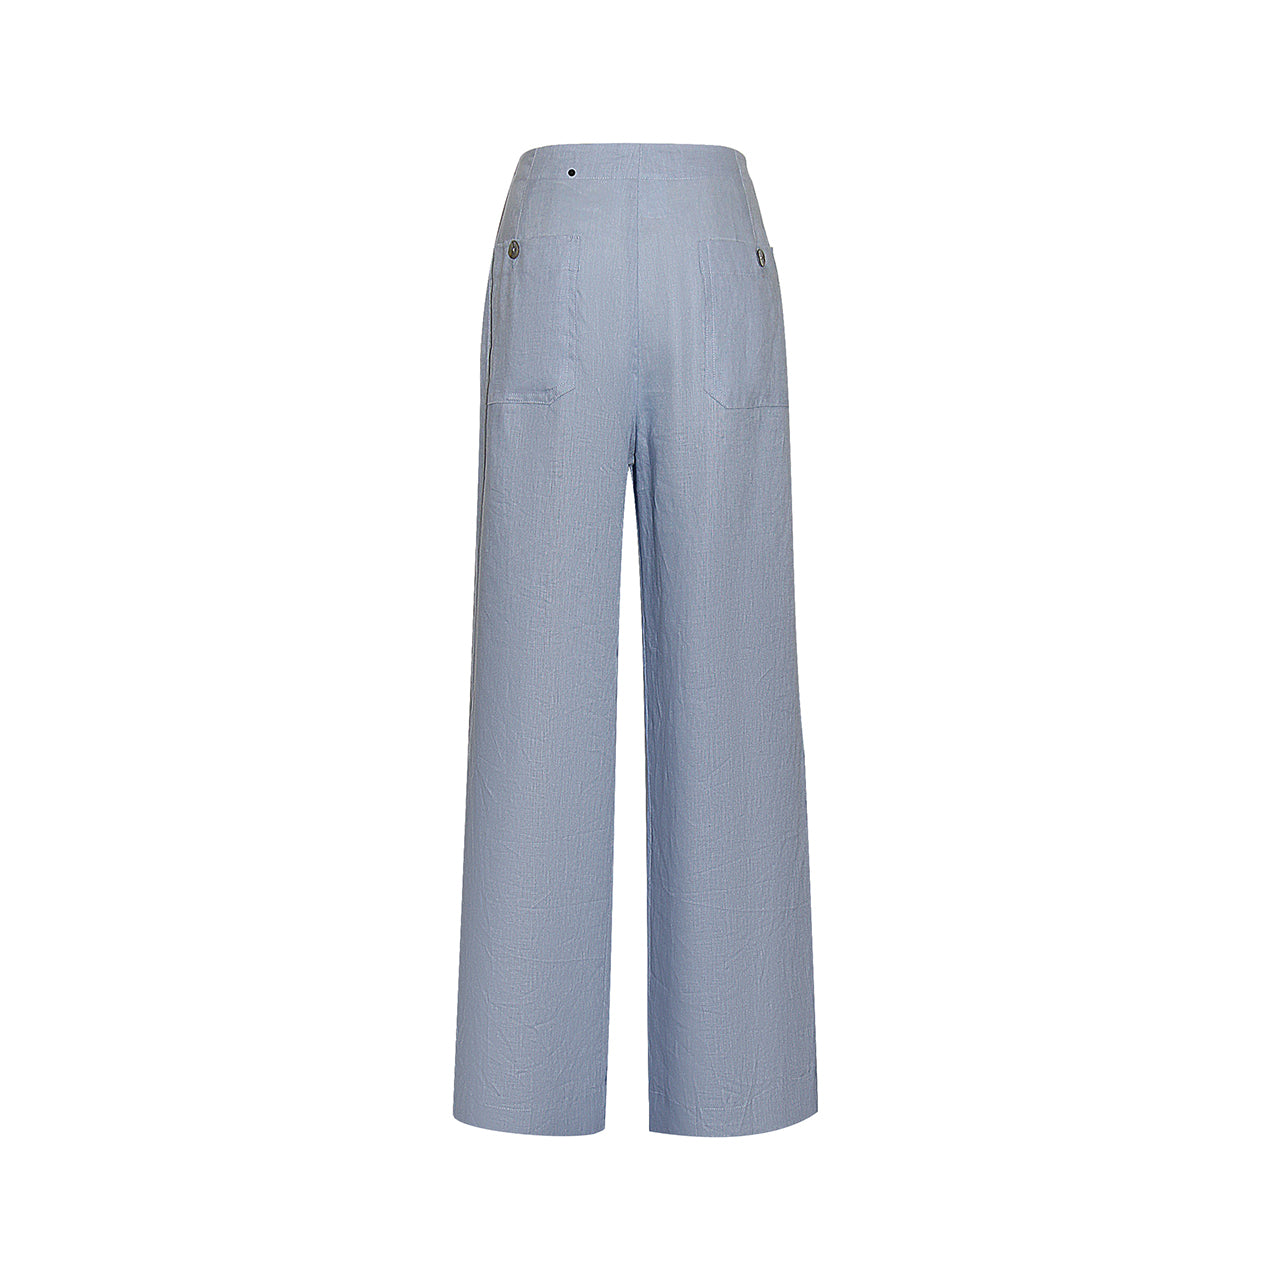 Must-Have SOFIA Baby Blue Linen Pants by Gosia Orlowska